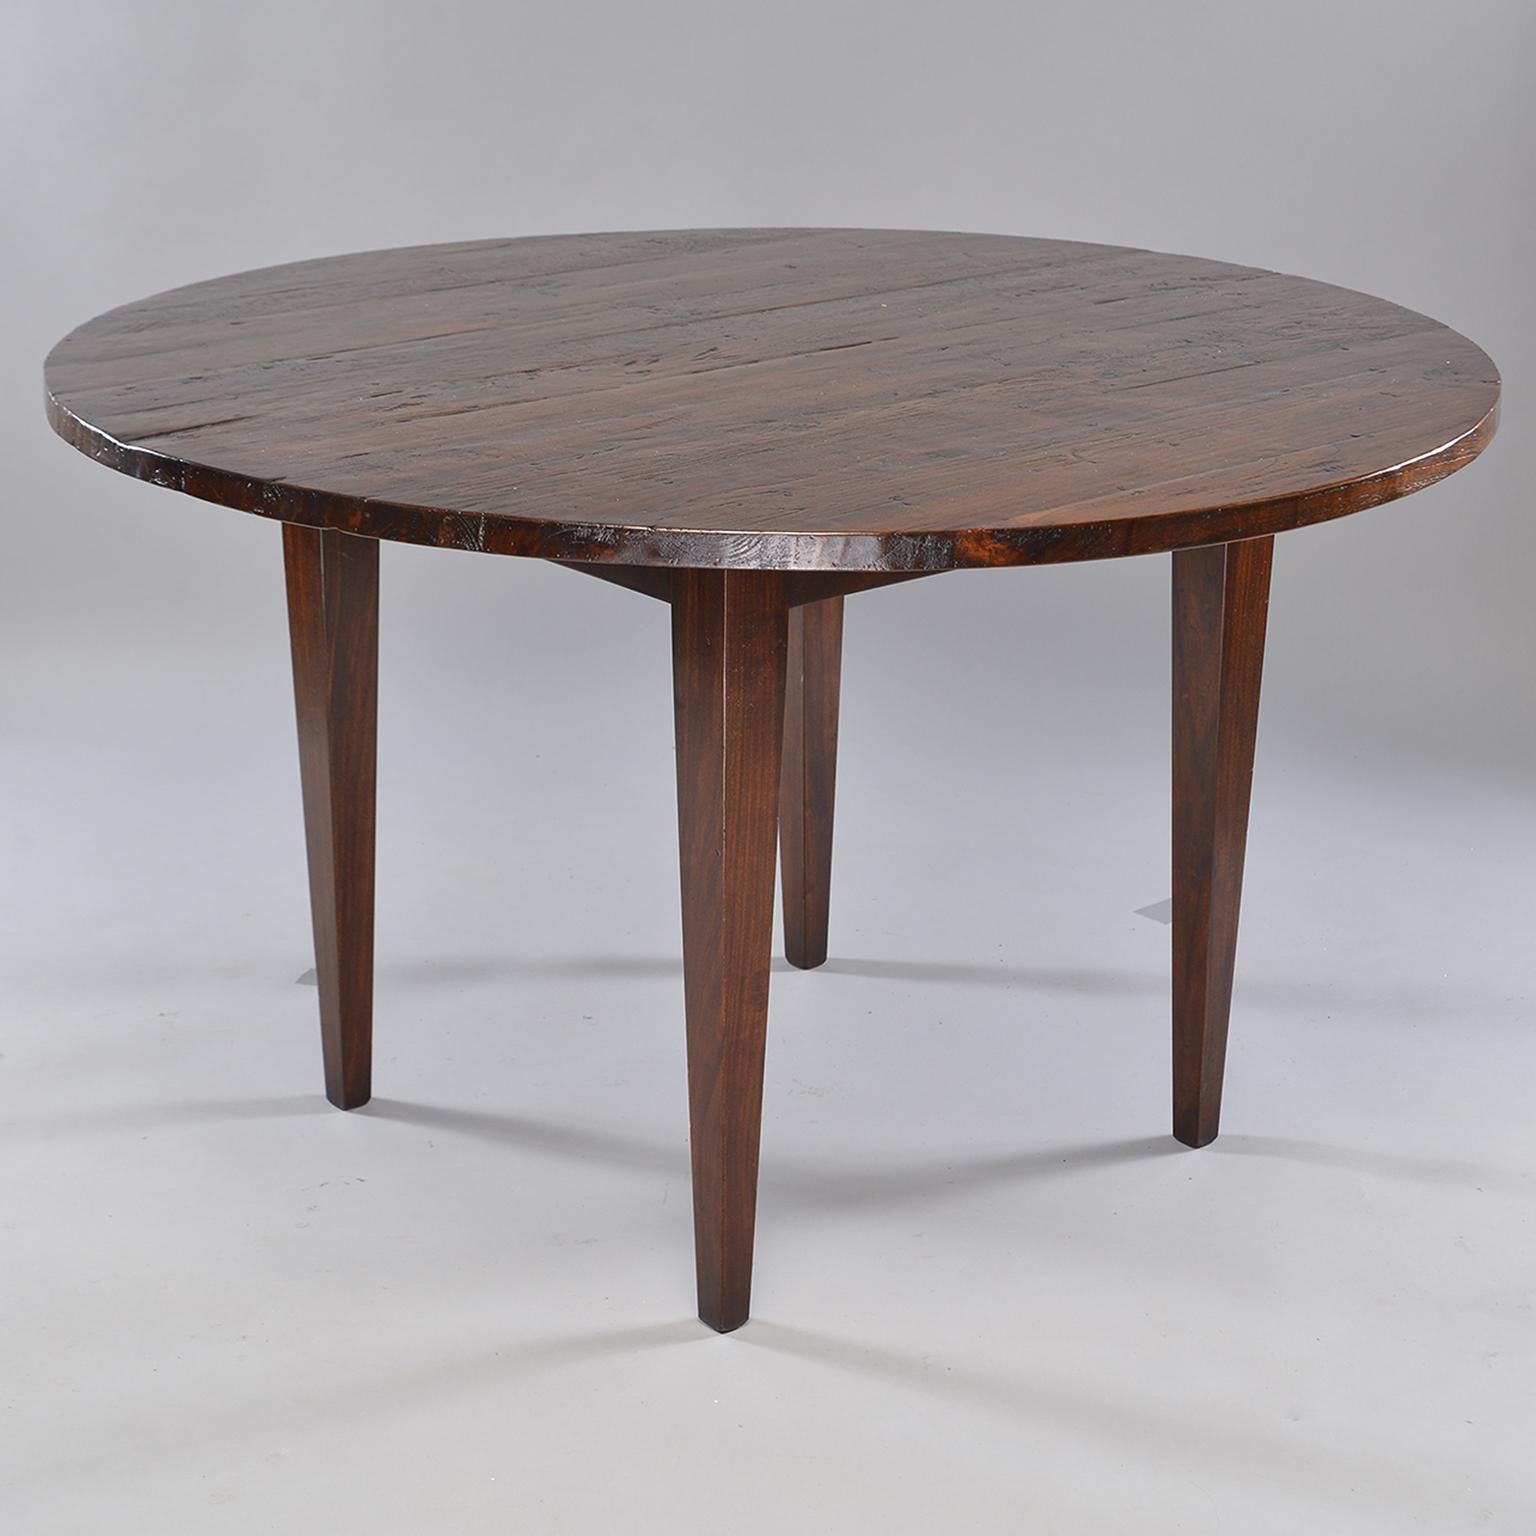 Found in England, this round chestnut table top dates from 1880s. Mounted on a new base, this handsome table is perfect for use as a breakfast or smaller dining table.